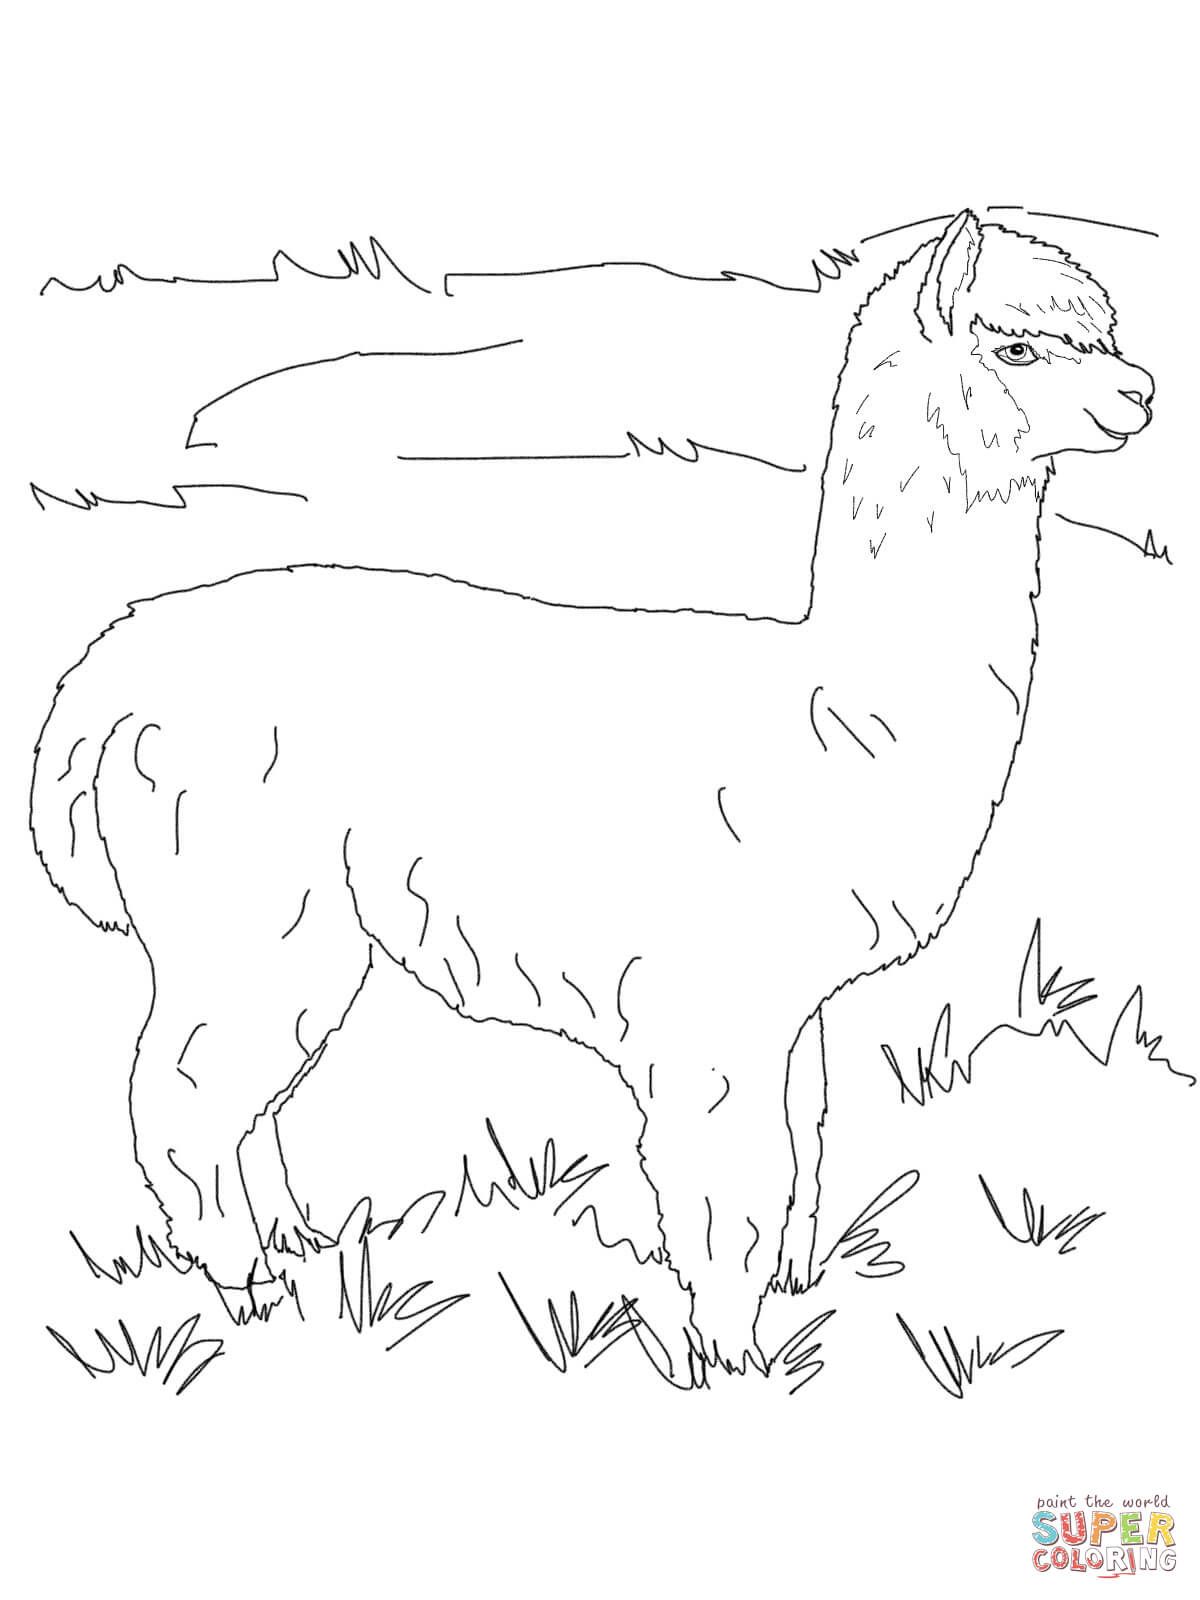 Alpaca coloring pages free coloring pages coloring pages coloring books cute alpaca